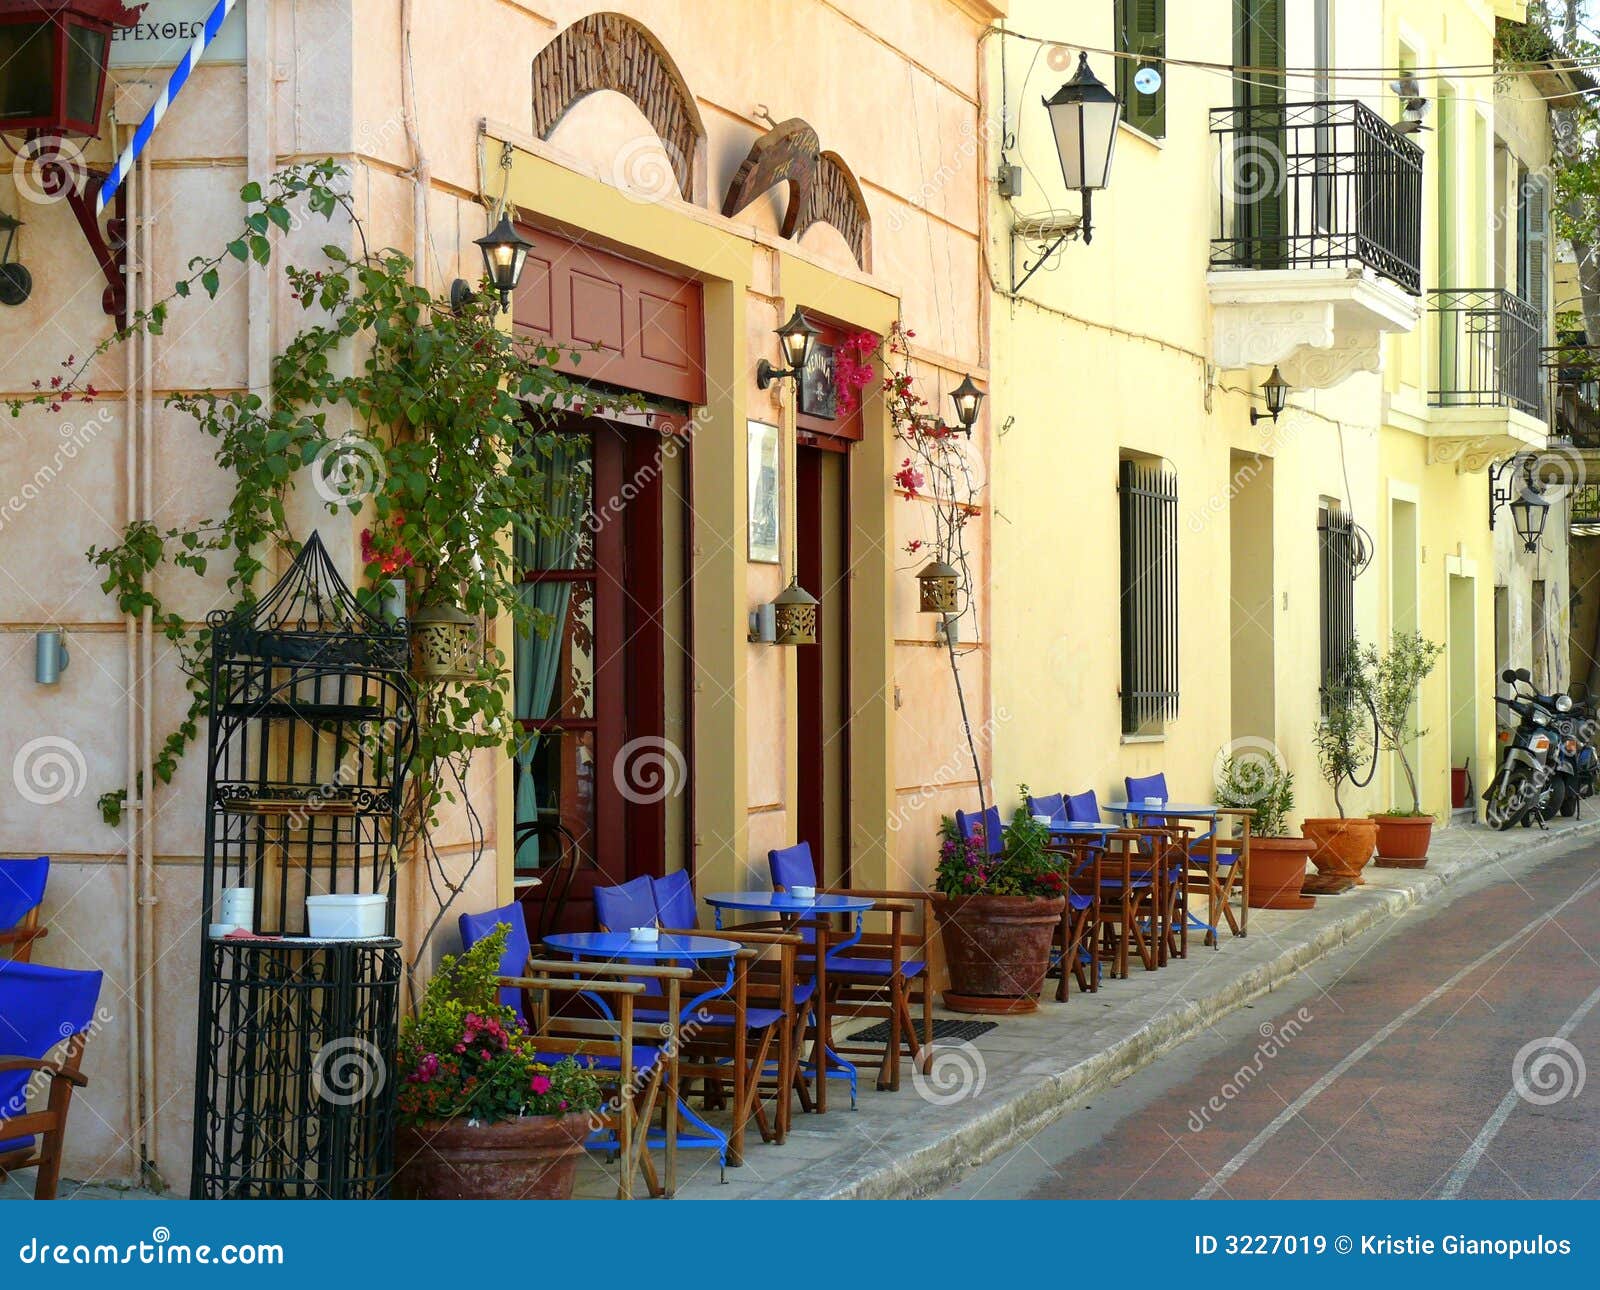 for tourism download and hospitality english 3227019  Free Royalty Plaka  Stock Athens Outdoor Images Image: Cafe